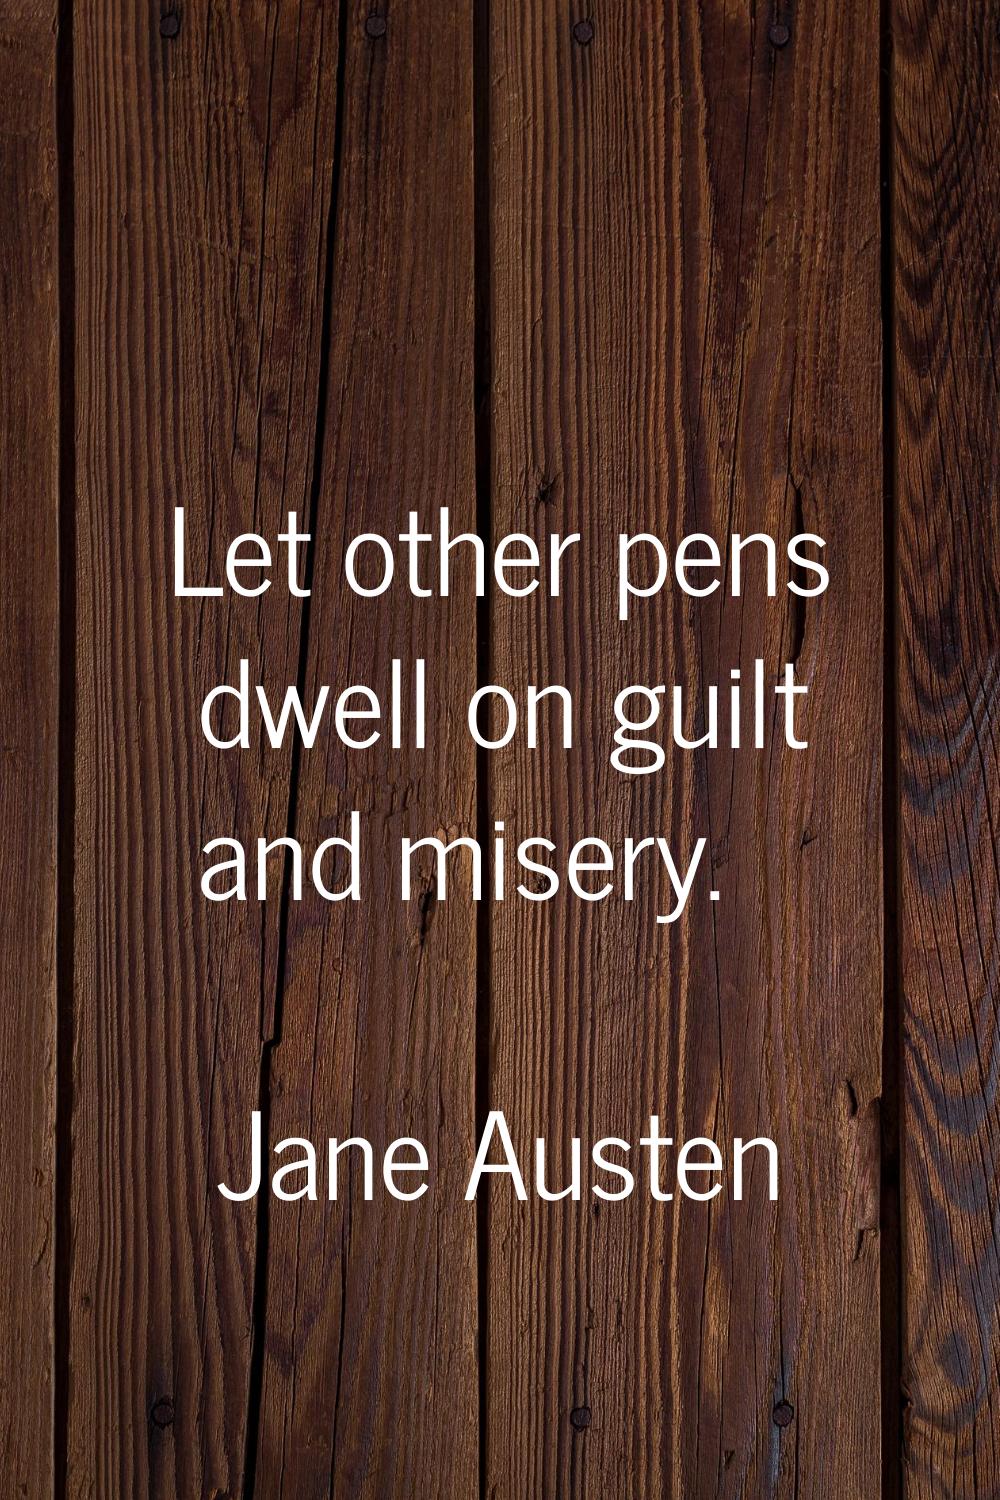 Let other pens dwell on guilt and misery.